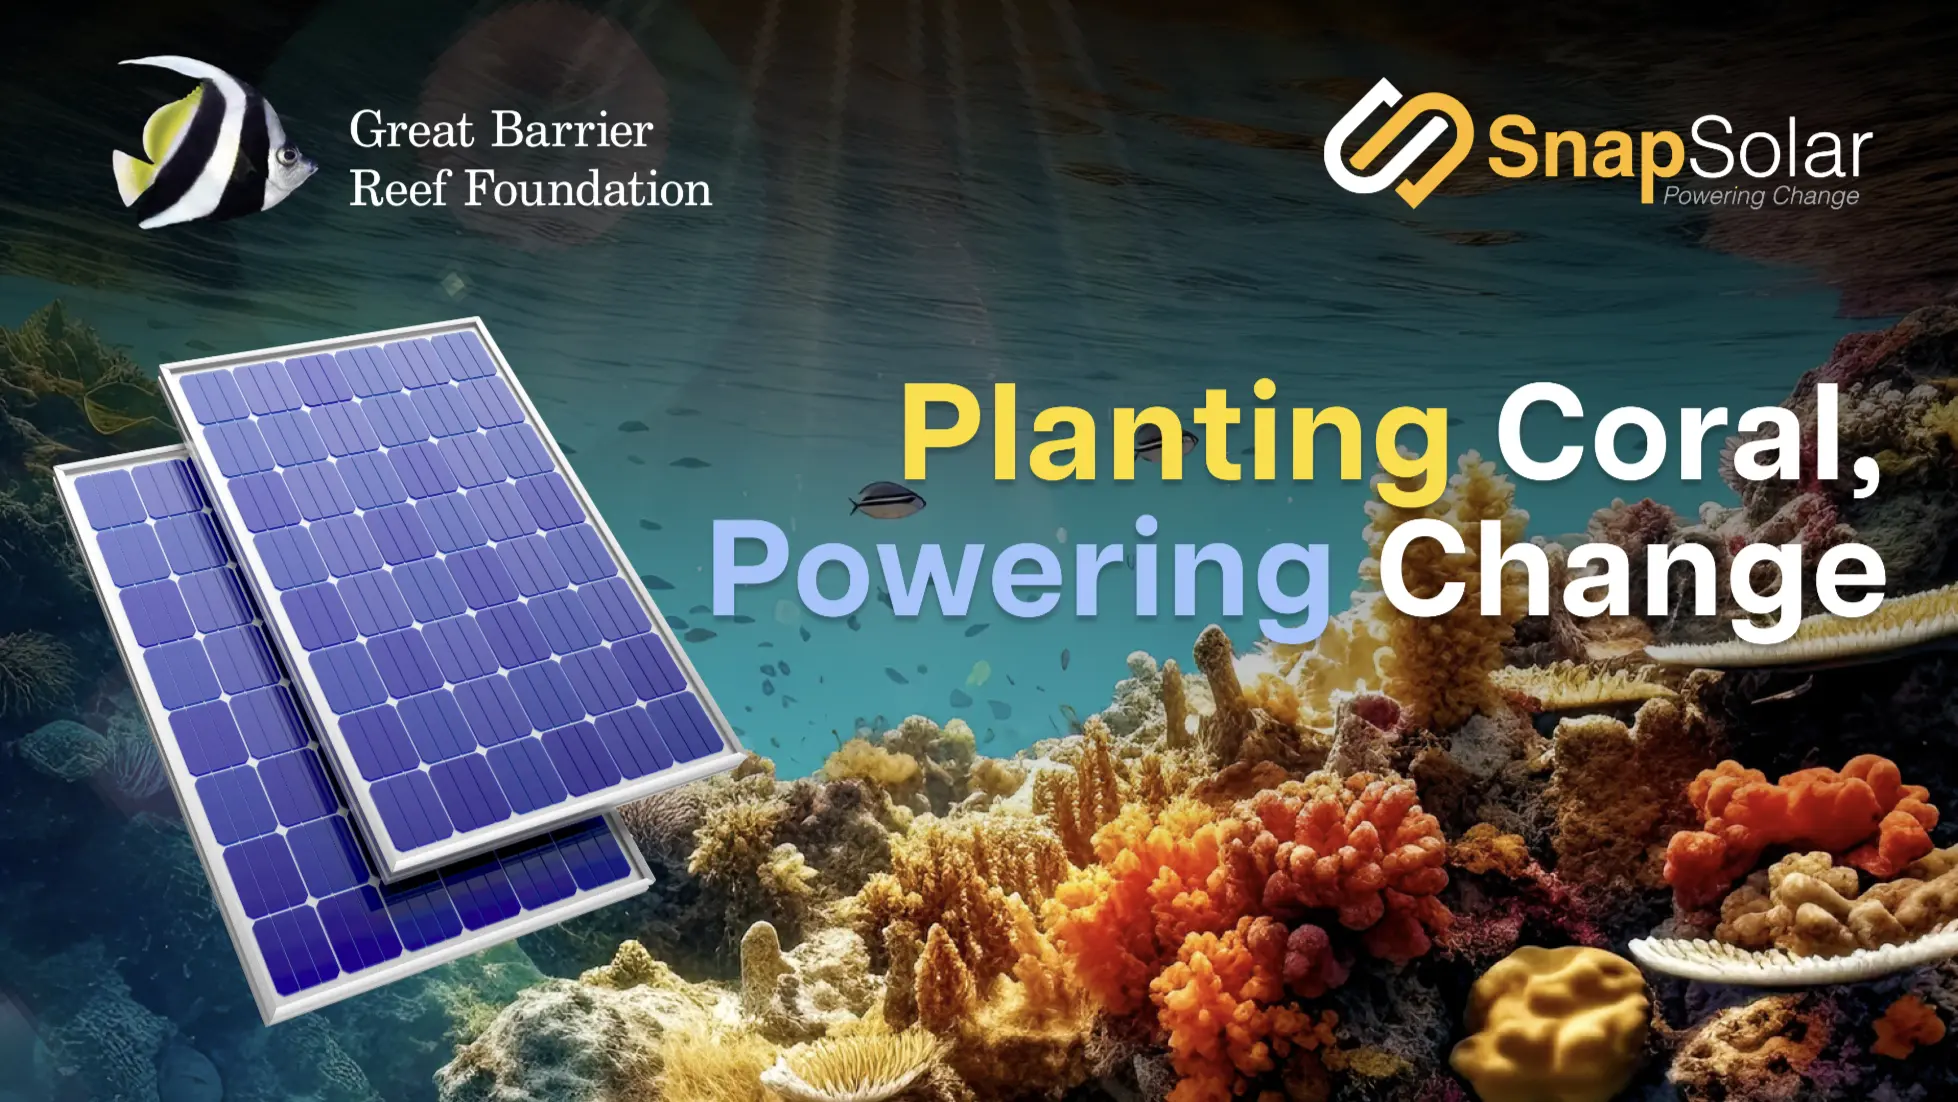 SnapSolar is Partnering with the Great Barrier Reef Foundation